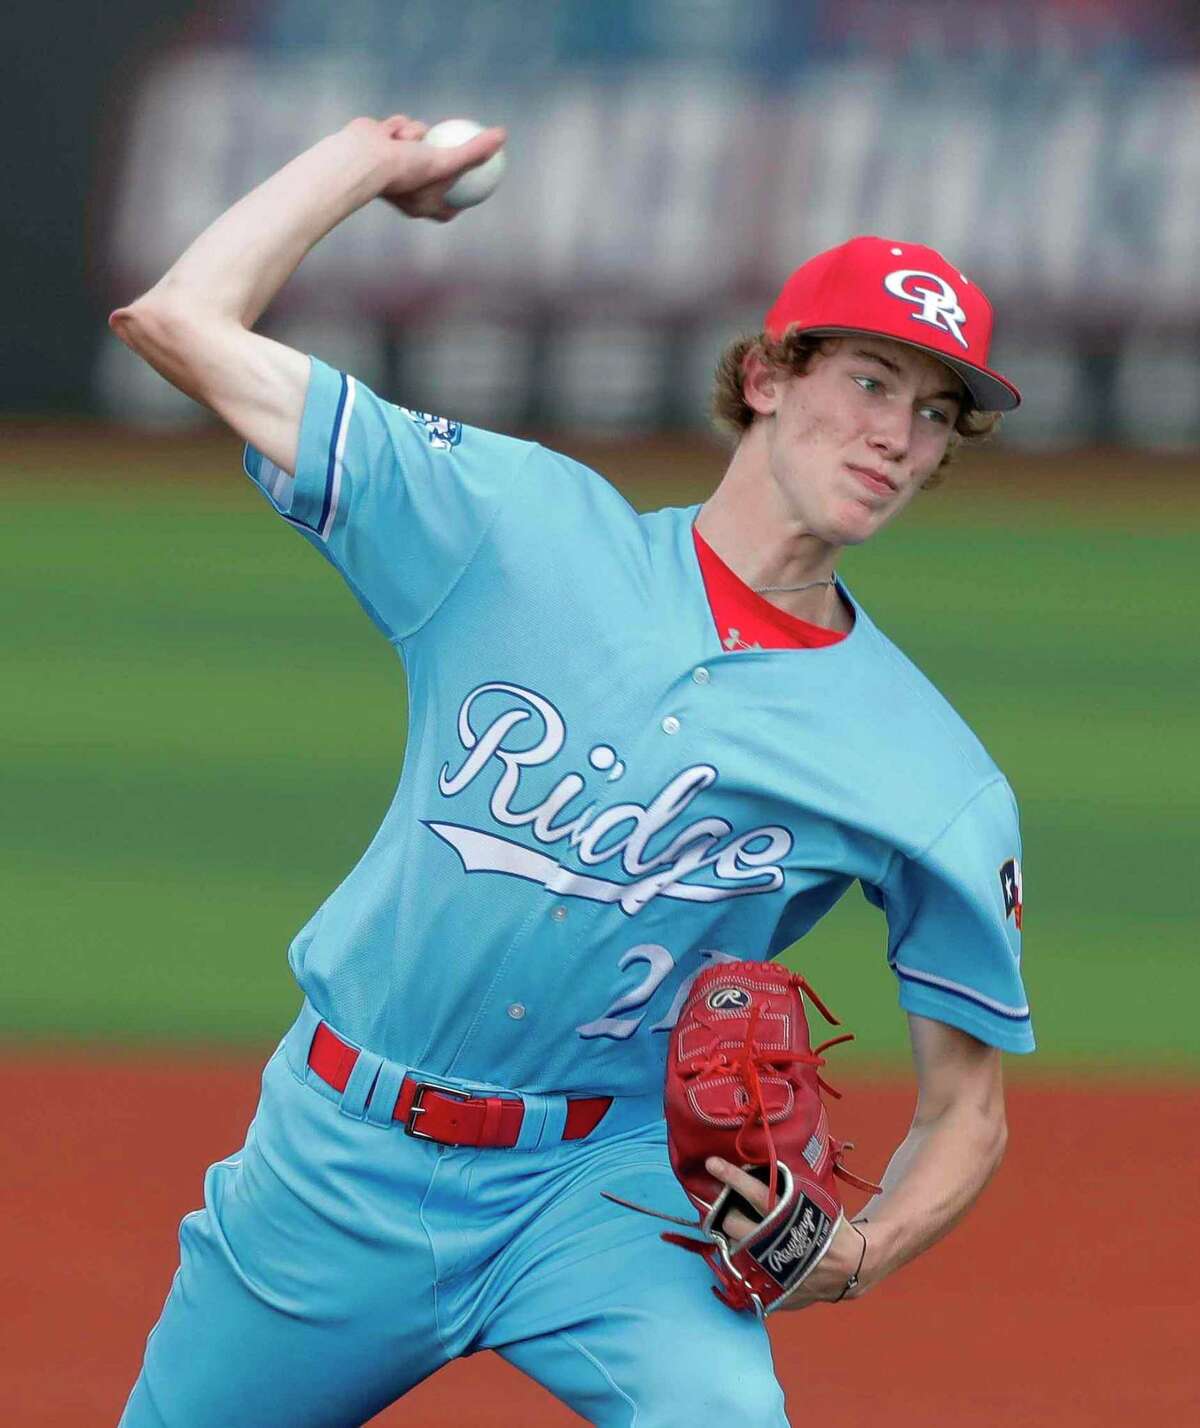 Oak Ridge pitcher Weston Moss (21), shown here last week, struck out eight in a win over Spring in a Region II-6A bi-district one-game playoff Friday evening at Grand Oaks High School.